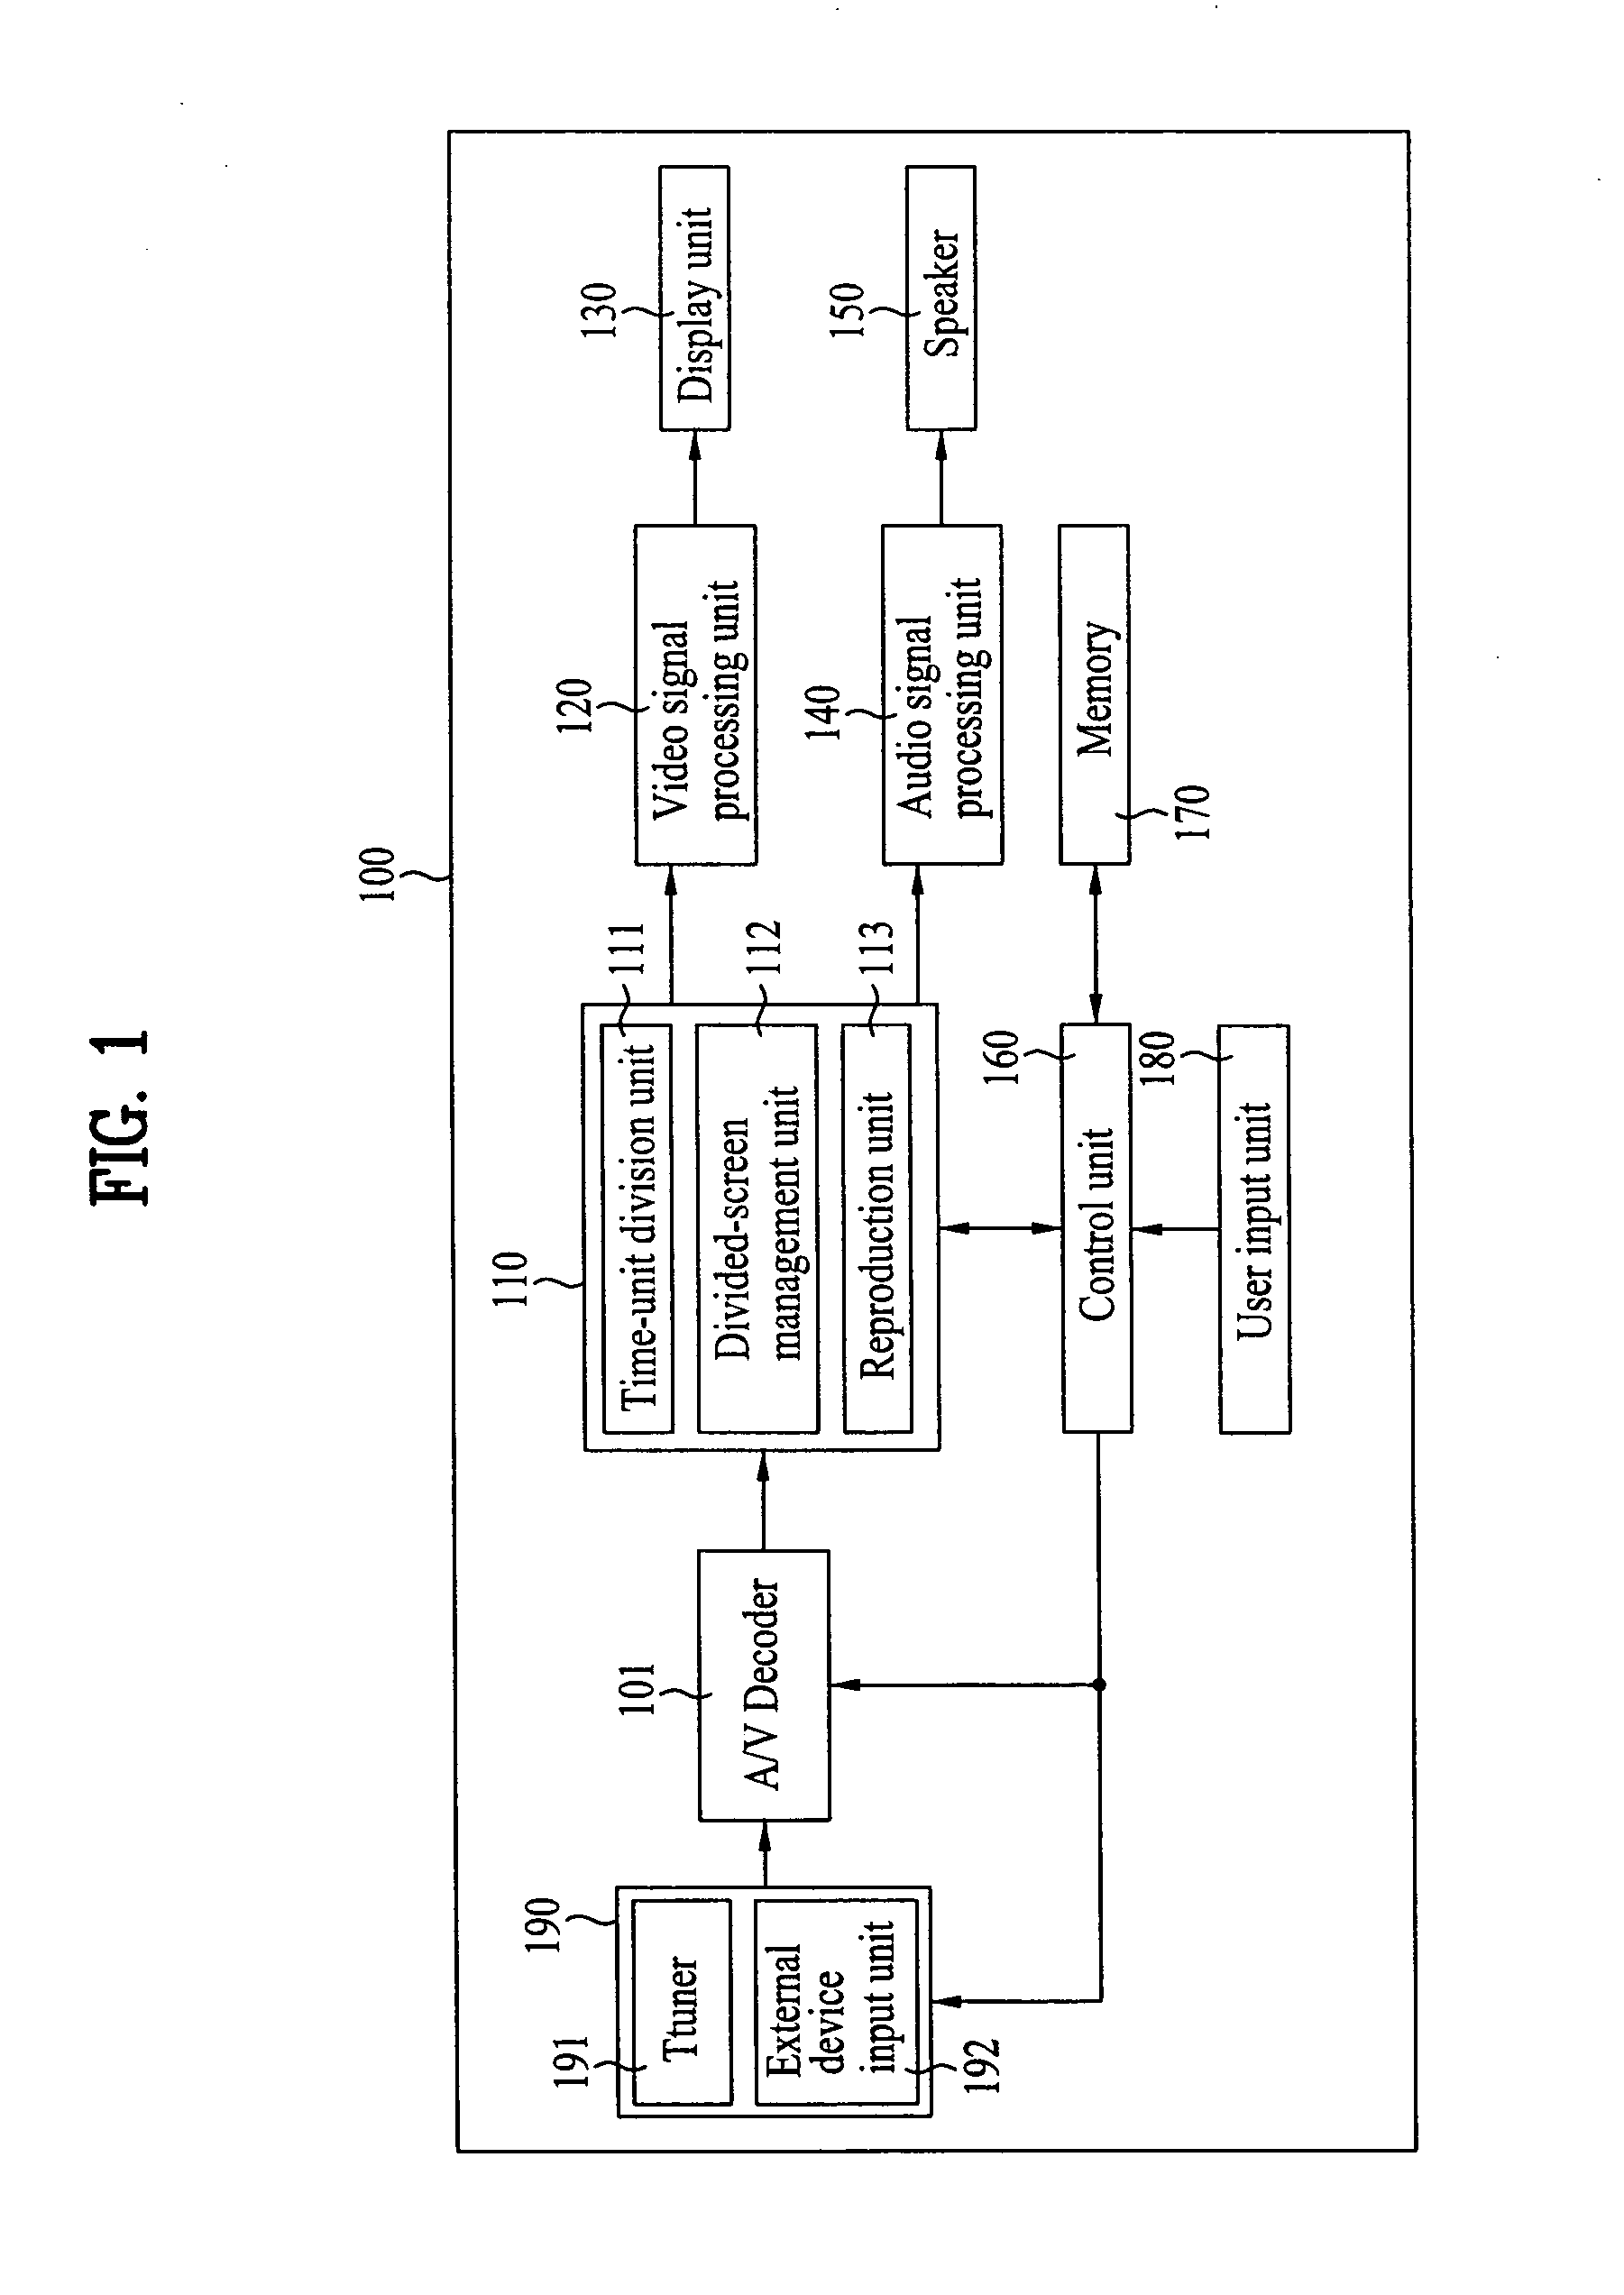 The display device for having a function of searching a divided screen, and the method for controlling the same